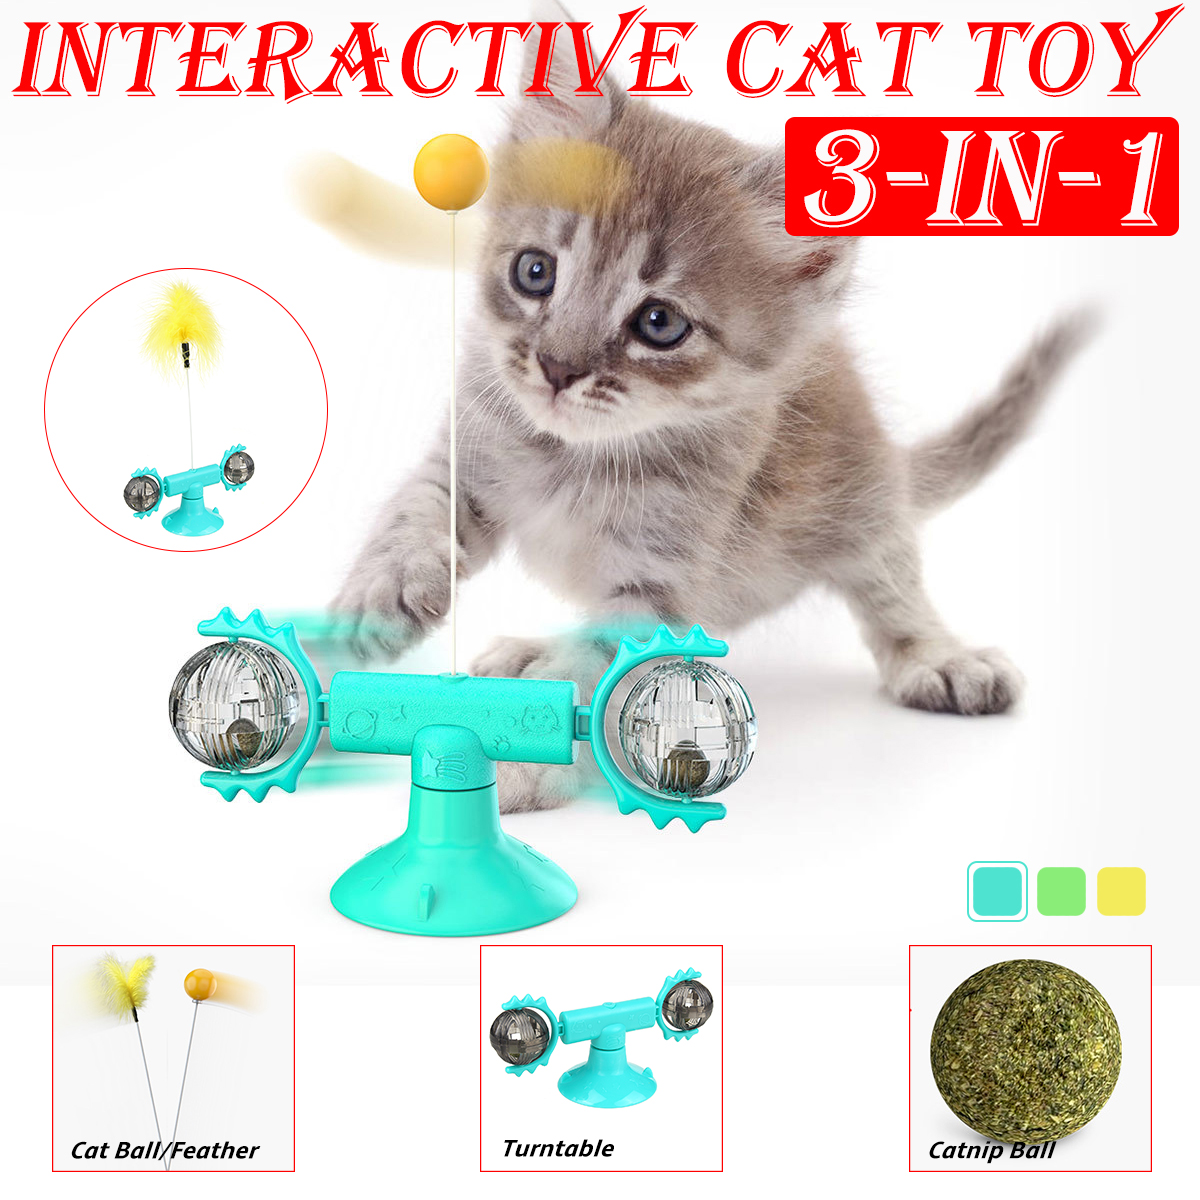 Swing-Toys-for-Cats-Interactive-Portable-Scratch-Hair-Brush-Cat-Toy-With-Catnip-Funny-Pet-Products-f-1798510-1